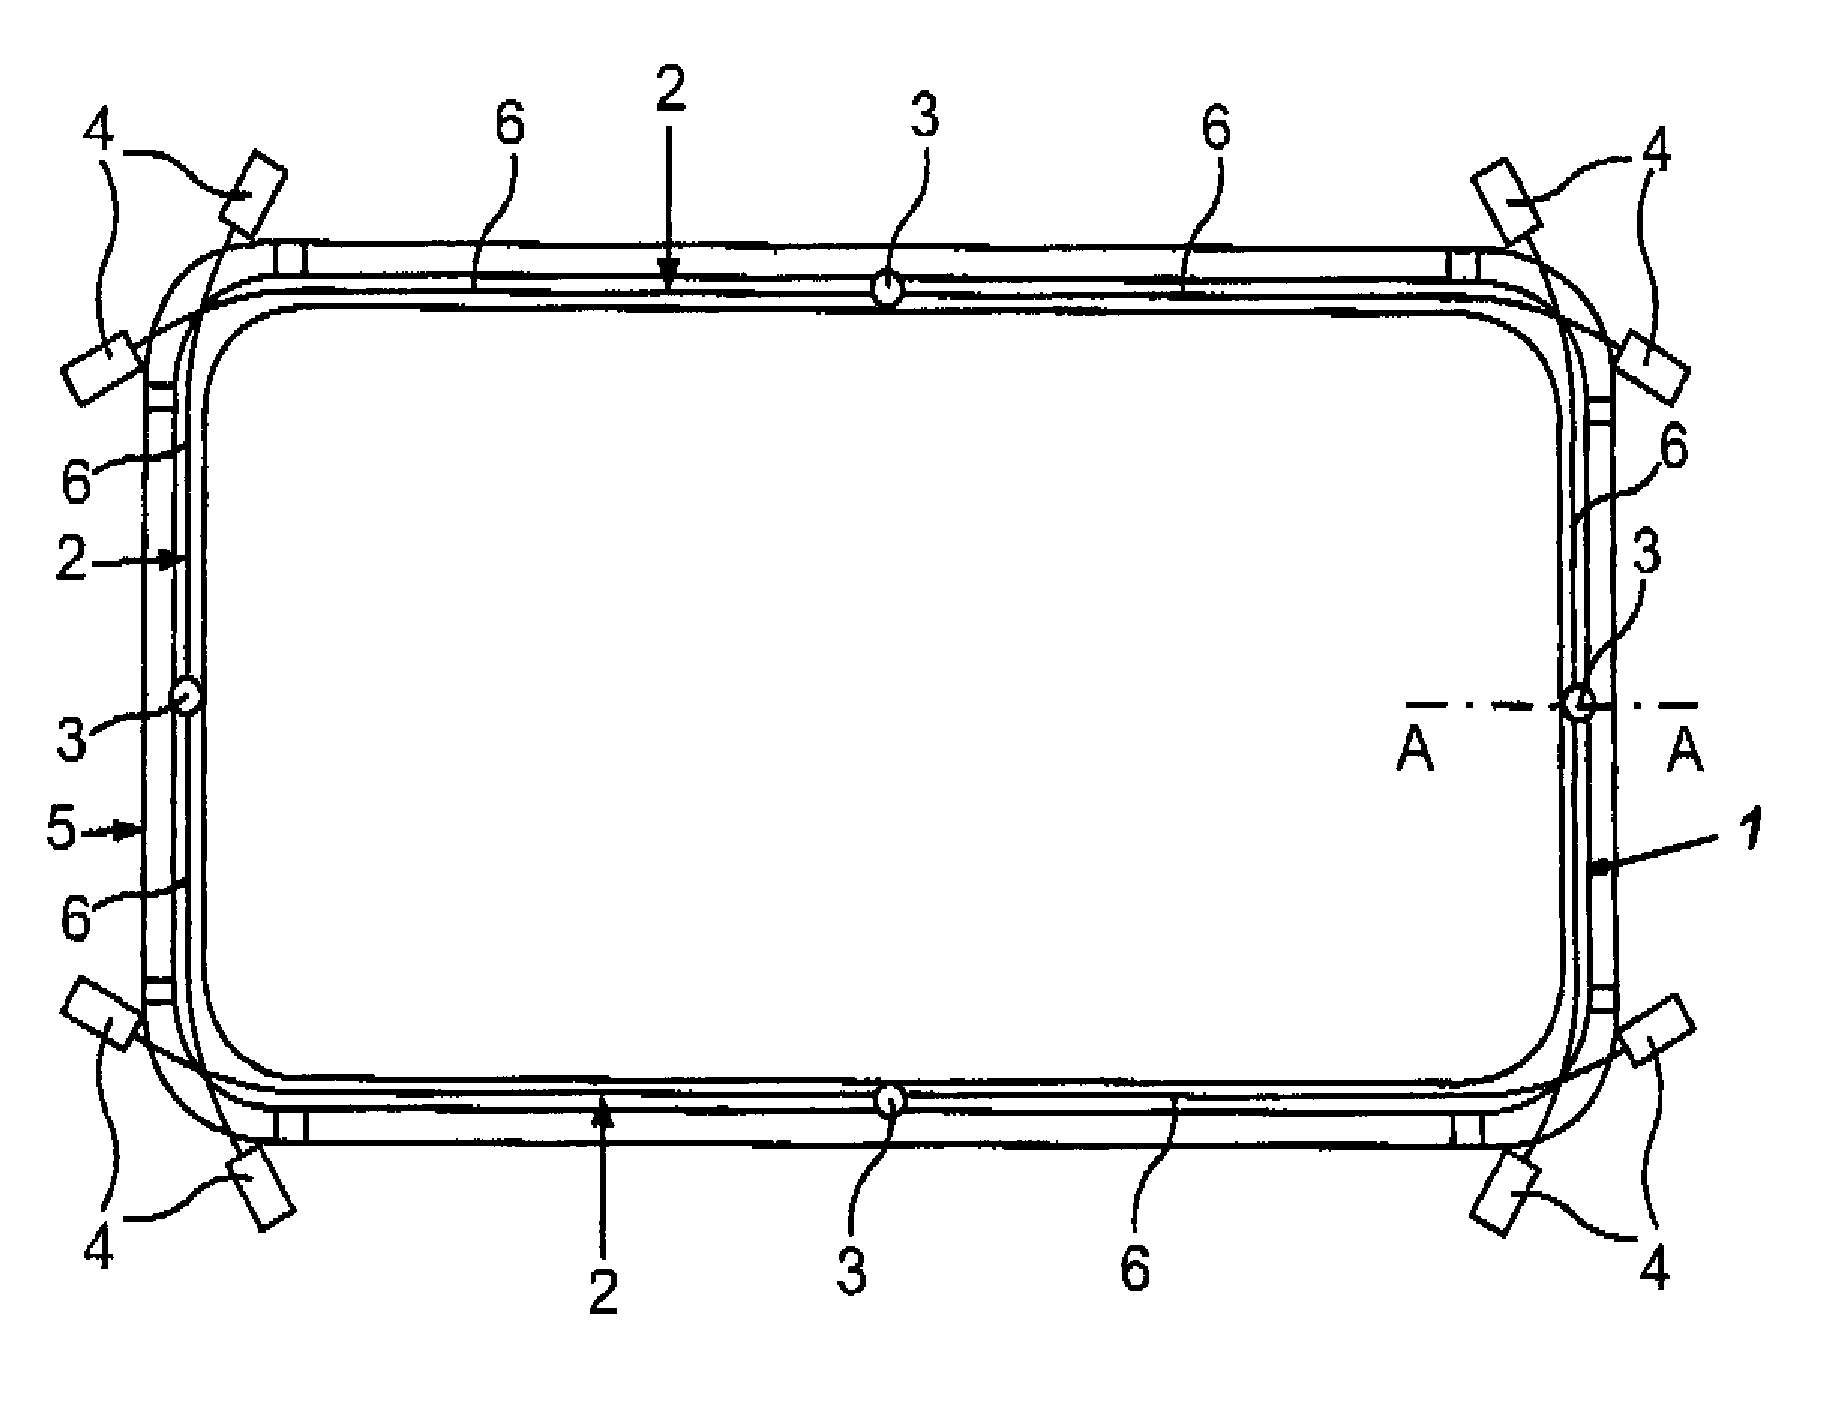 Peripheral illumination device for a vehicle component